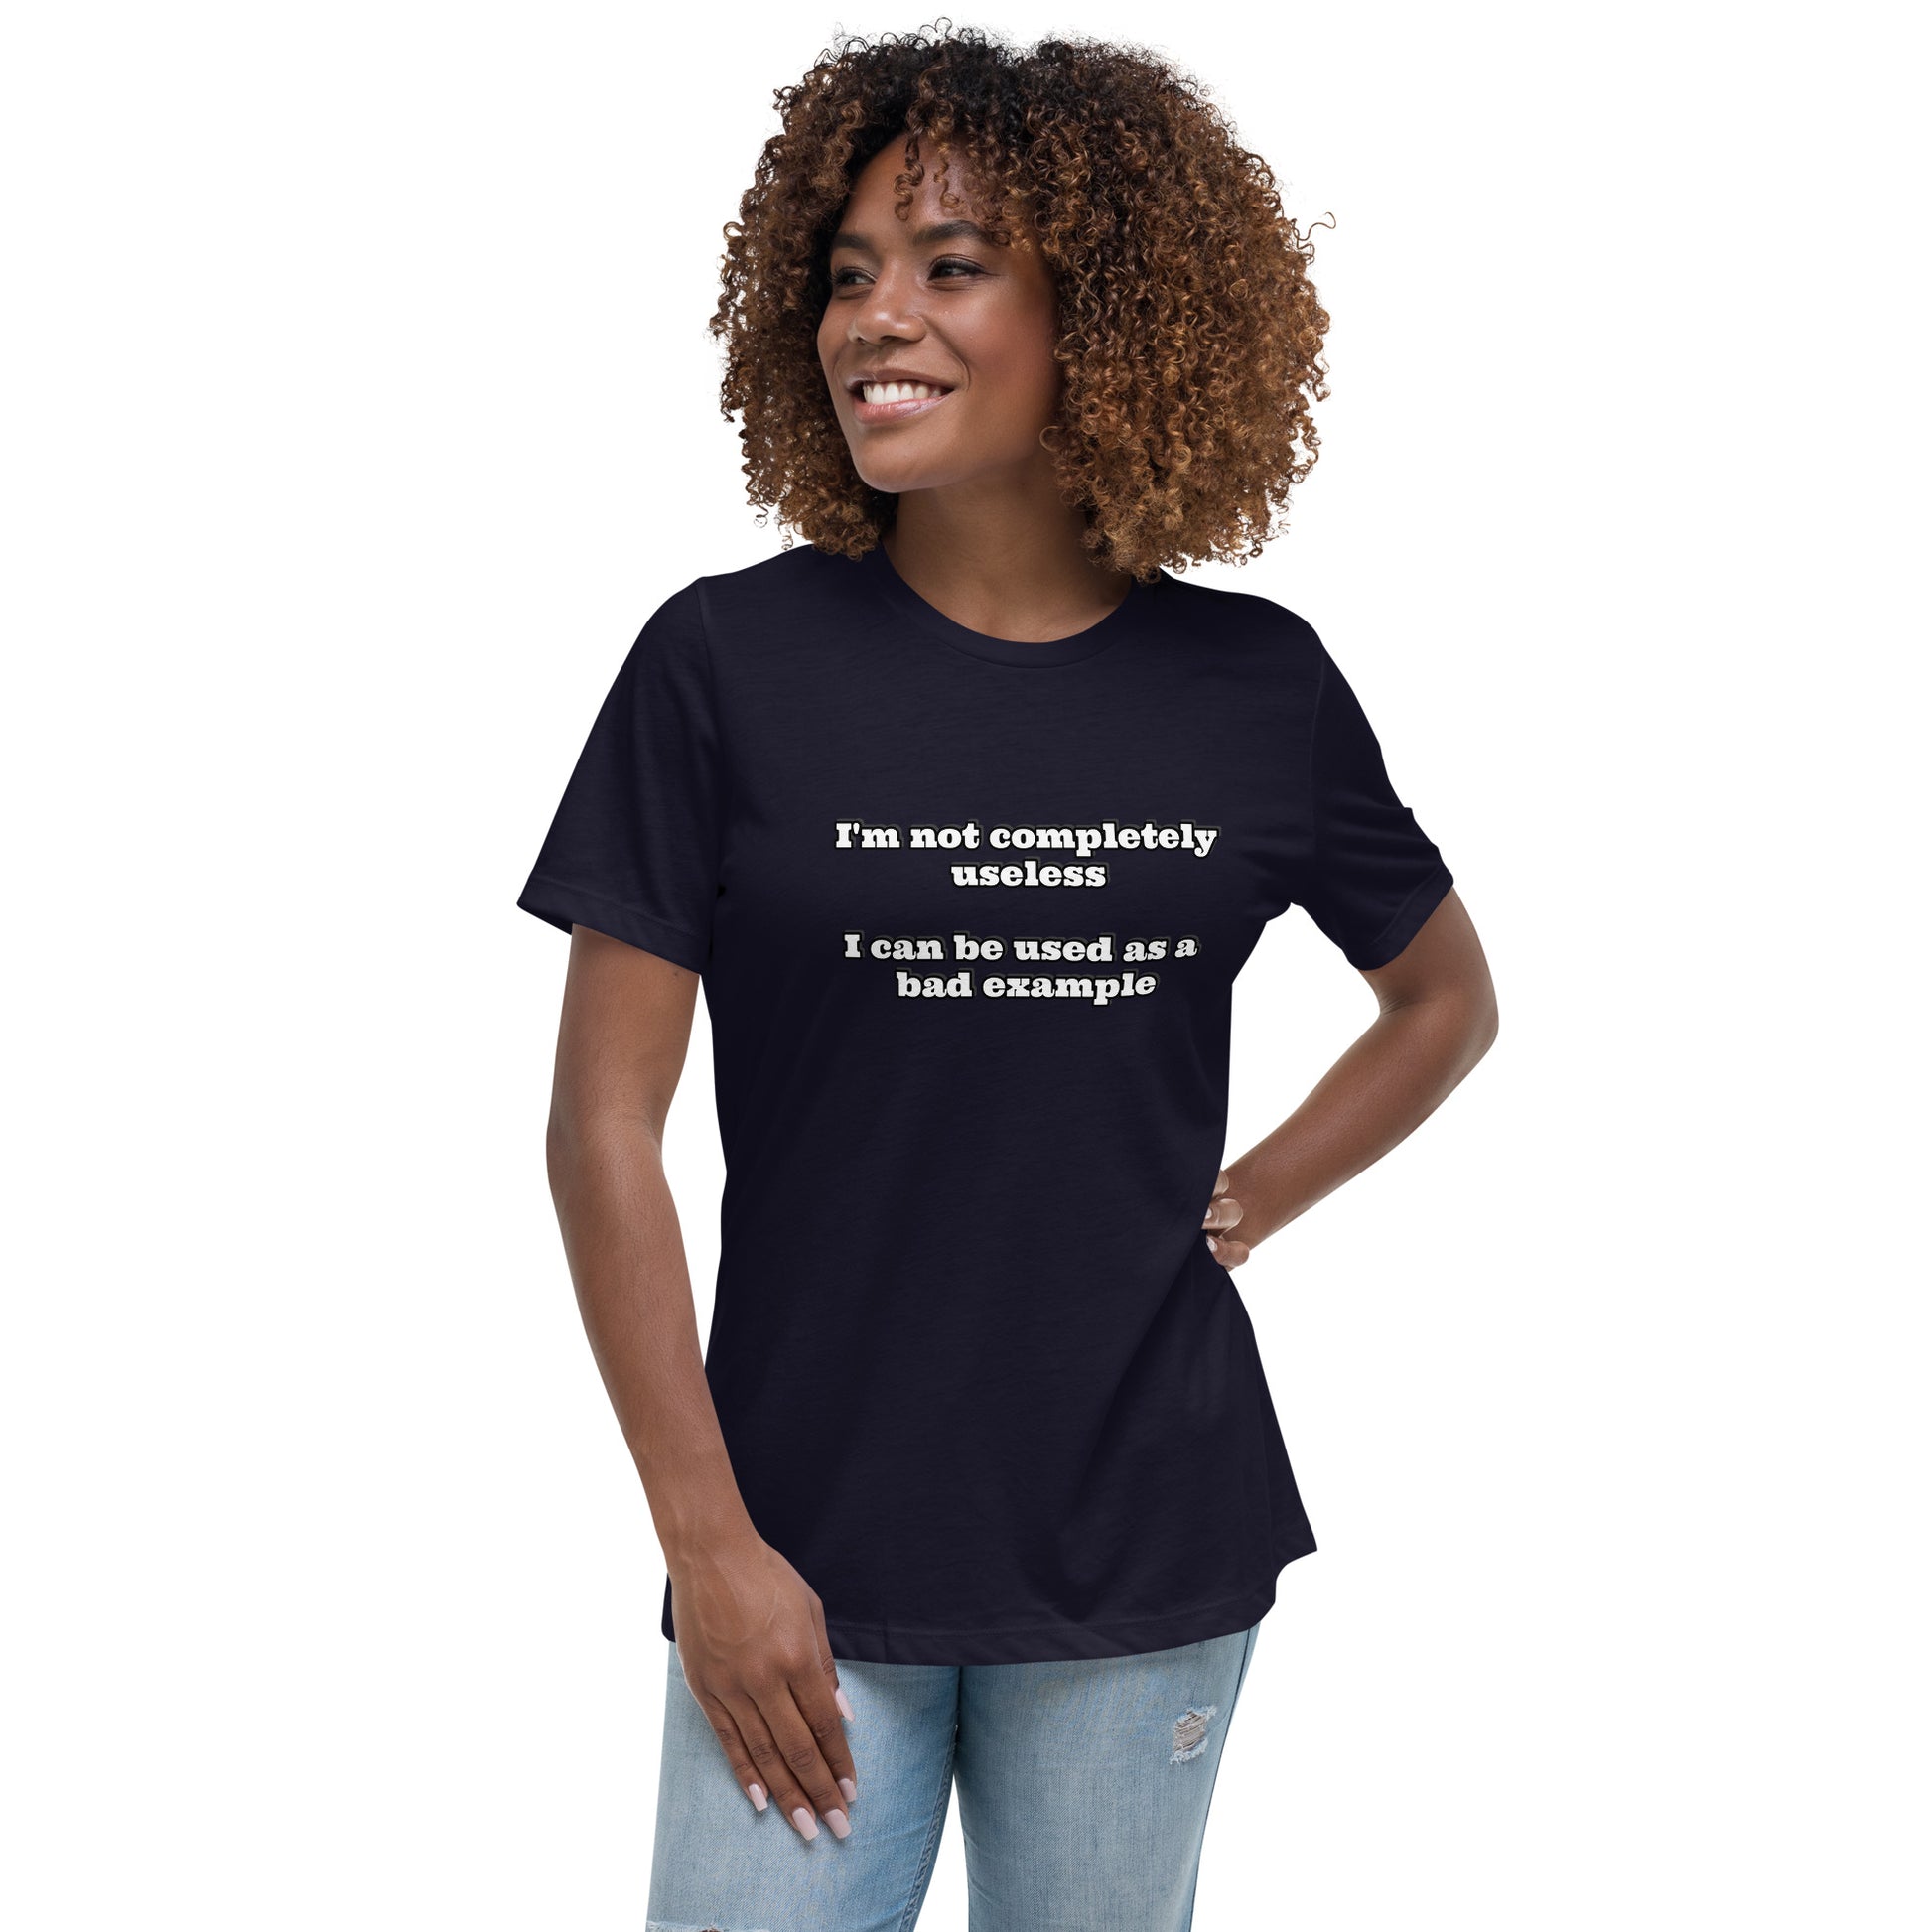 Women with dark grey t-shirt with text “I'm not completely useless I can be used as a bad example”